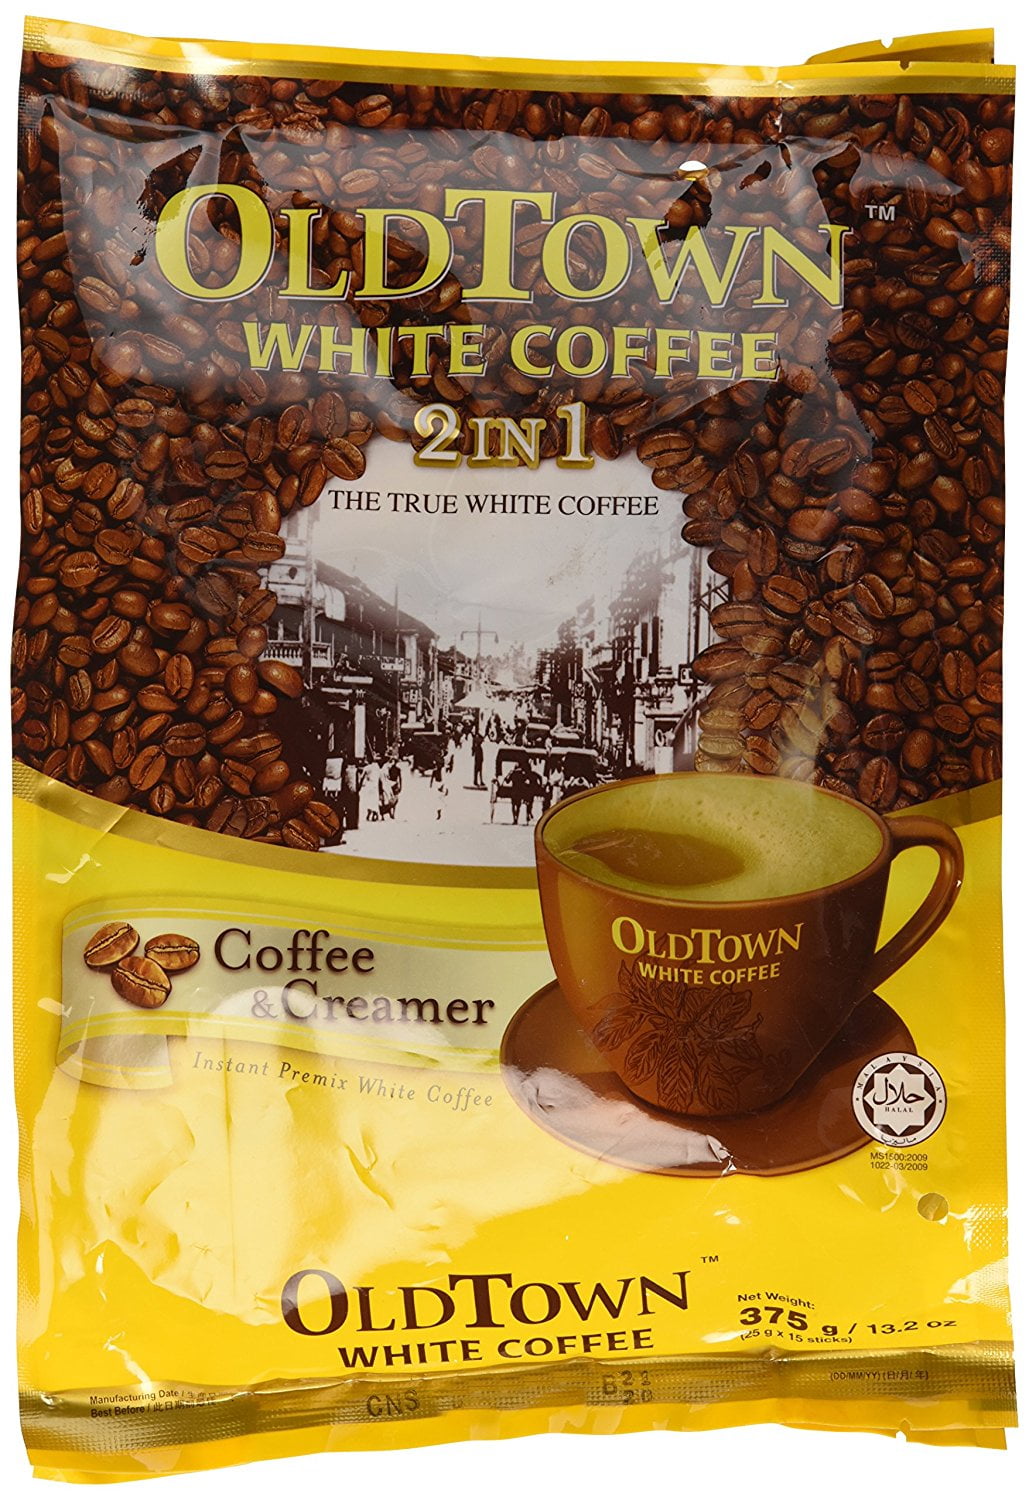 Old Town White Coffee I 2 In 1 Coffee & Creamer